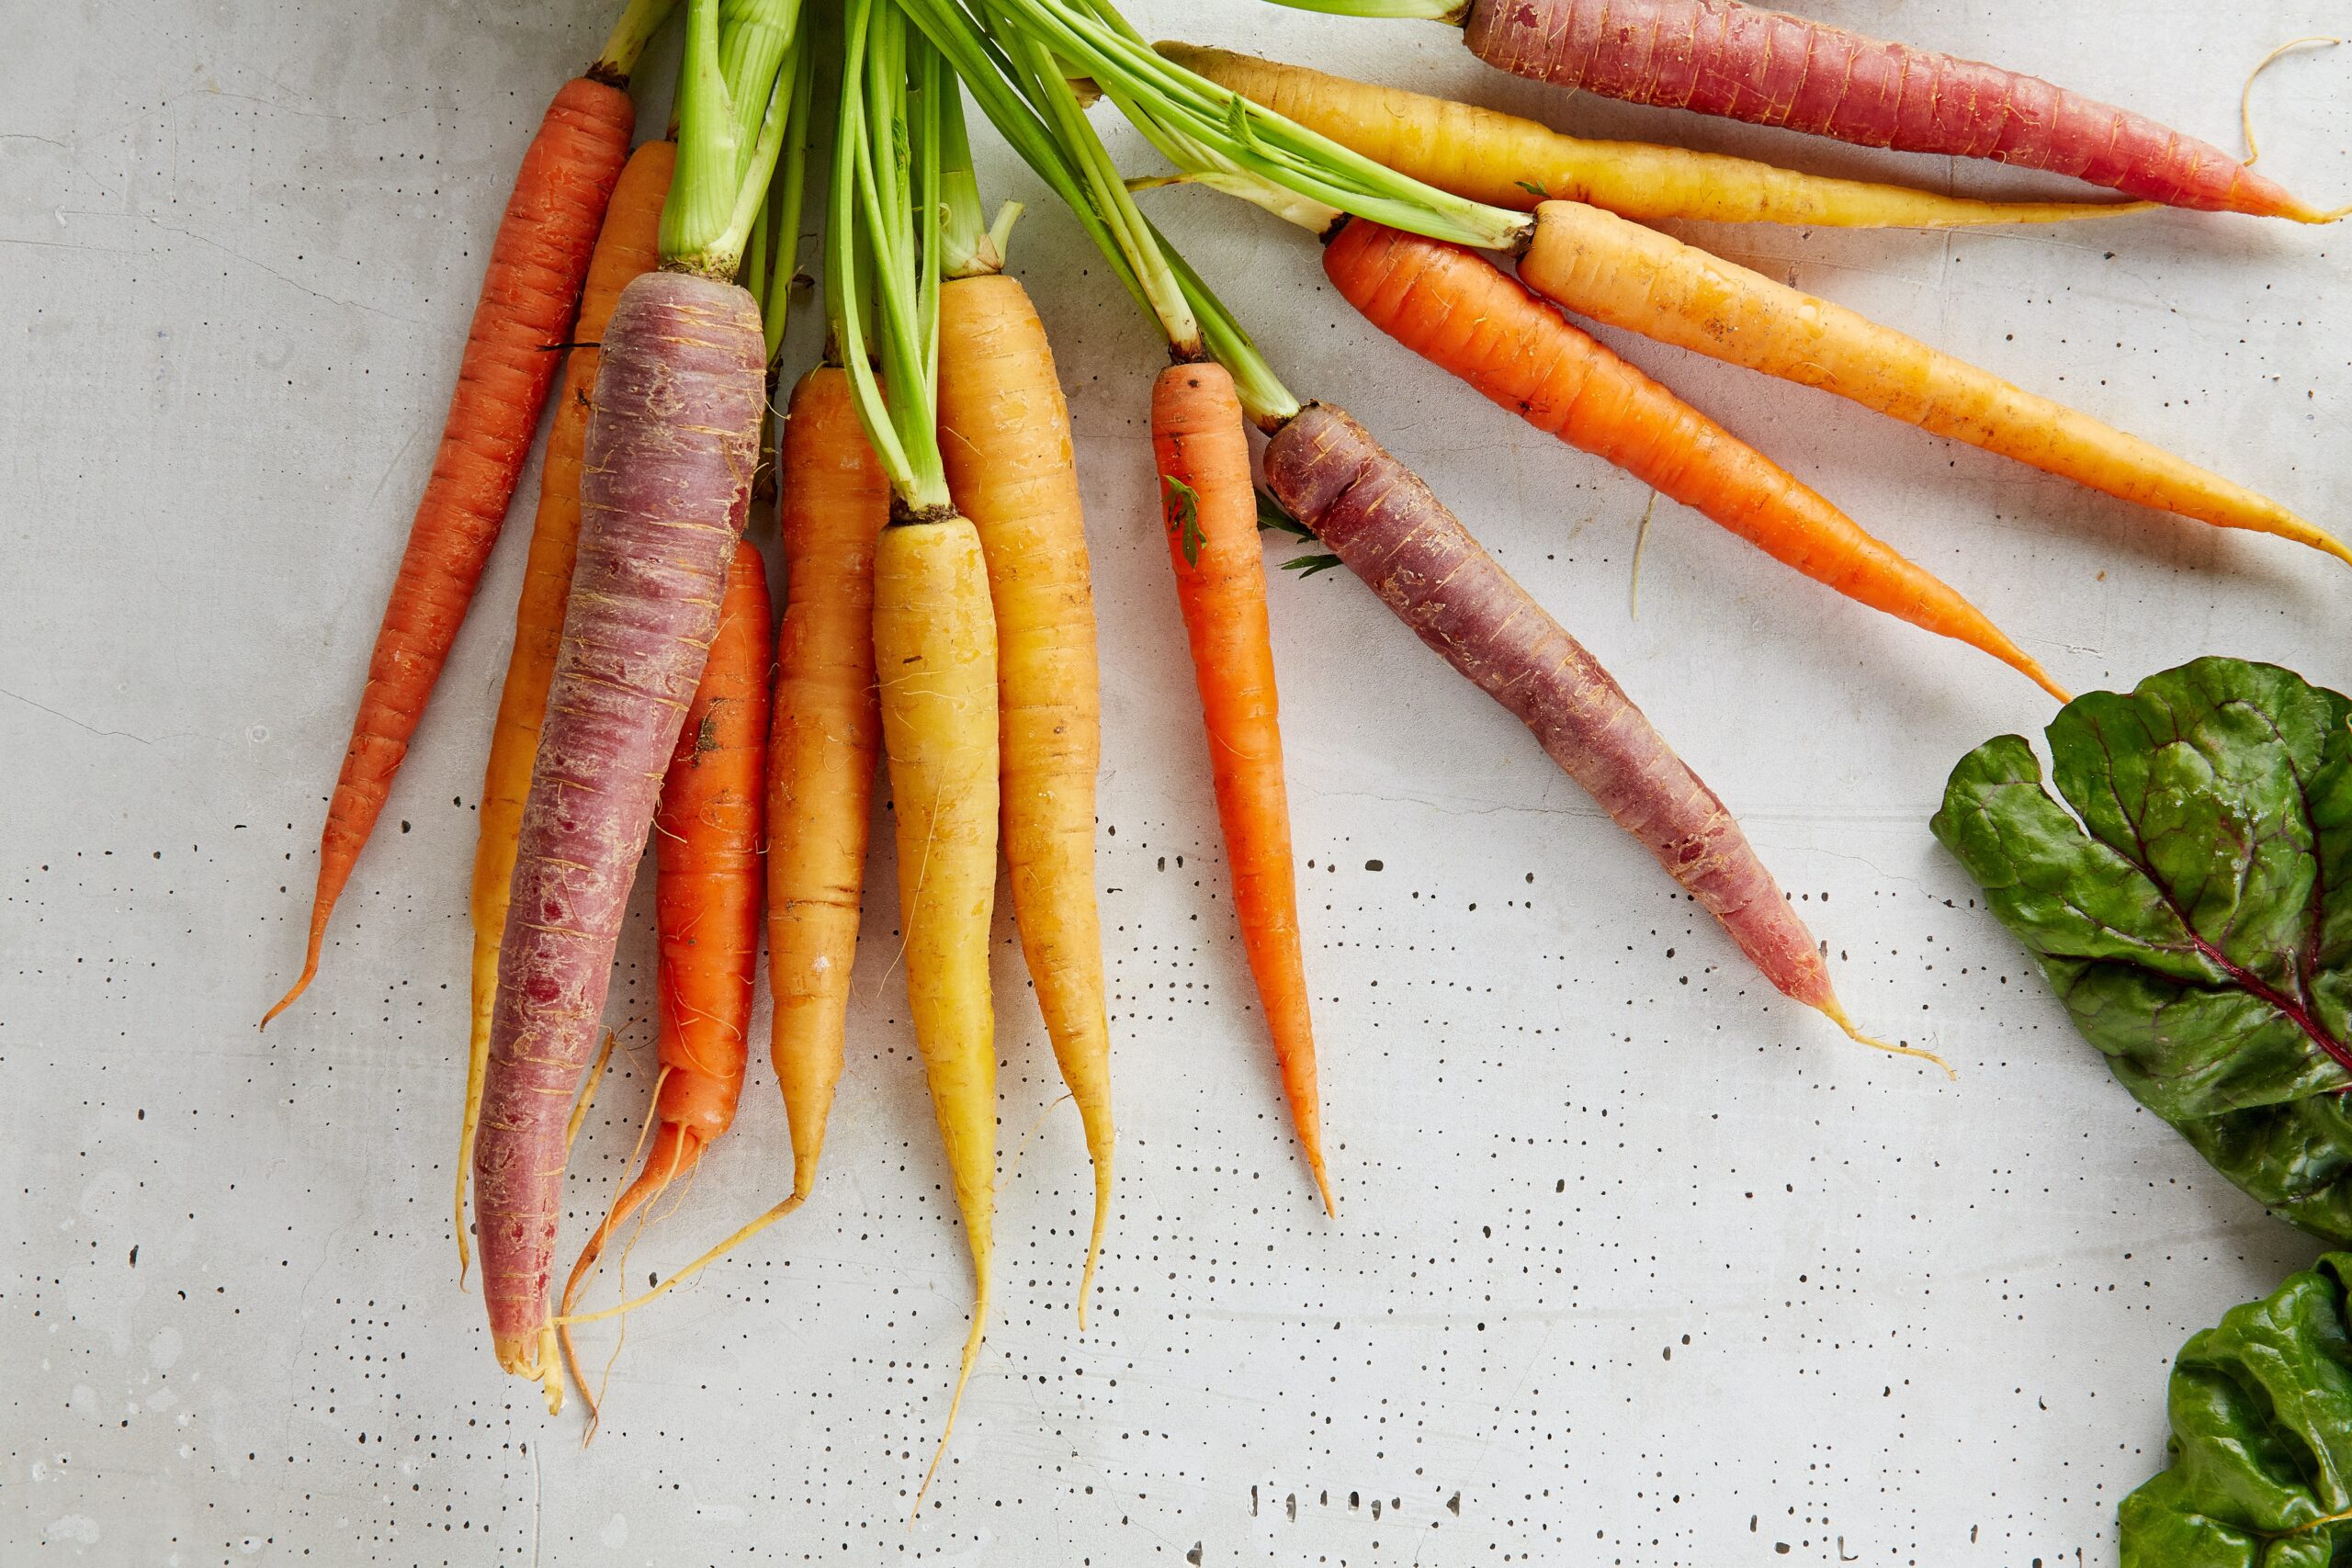 A bunch on carrots. The carrots are different colours including orange, yellow, and purple. They still have the green tops on them and are laying on a white background.